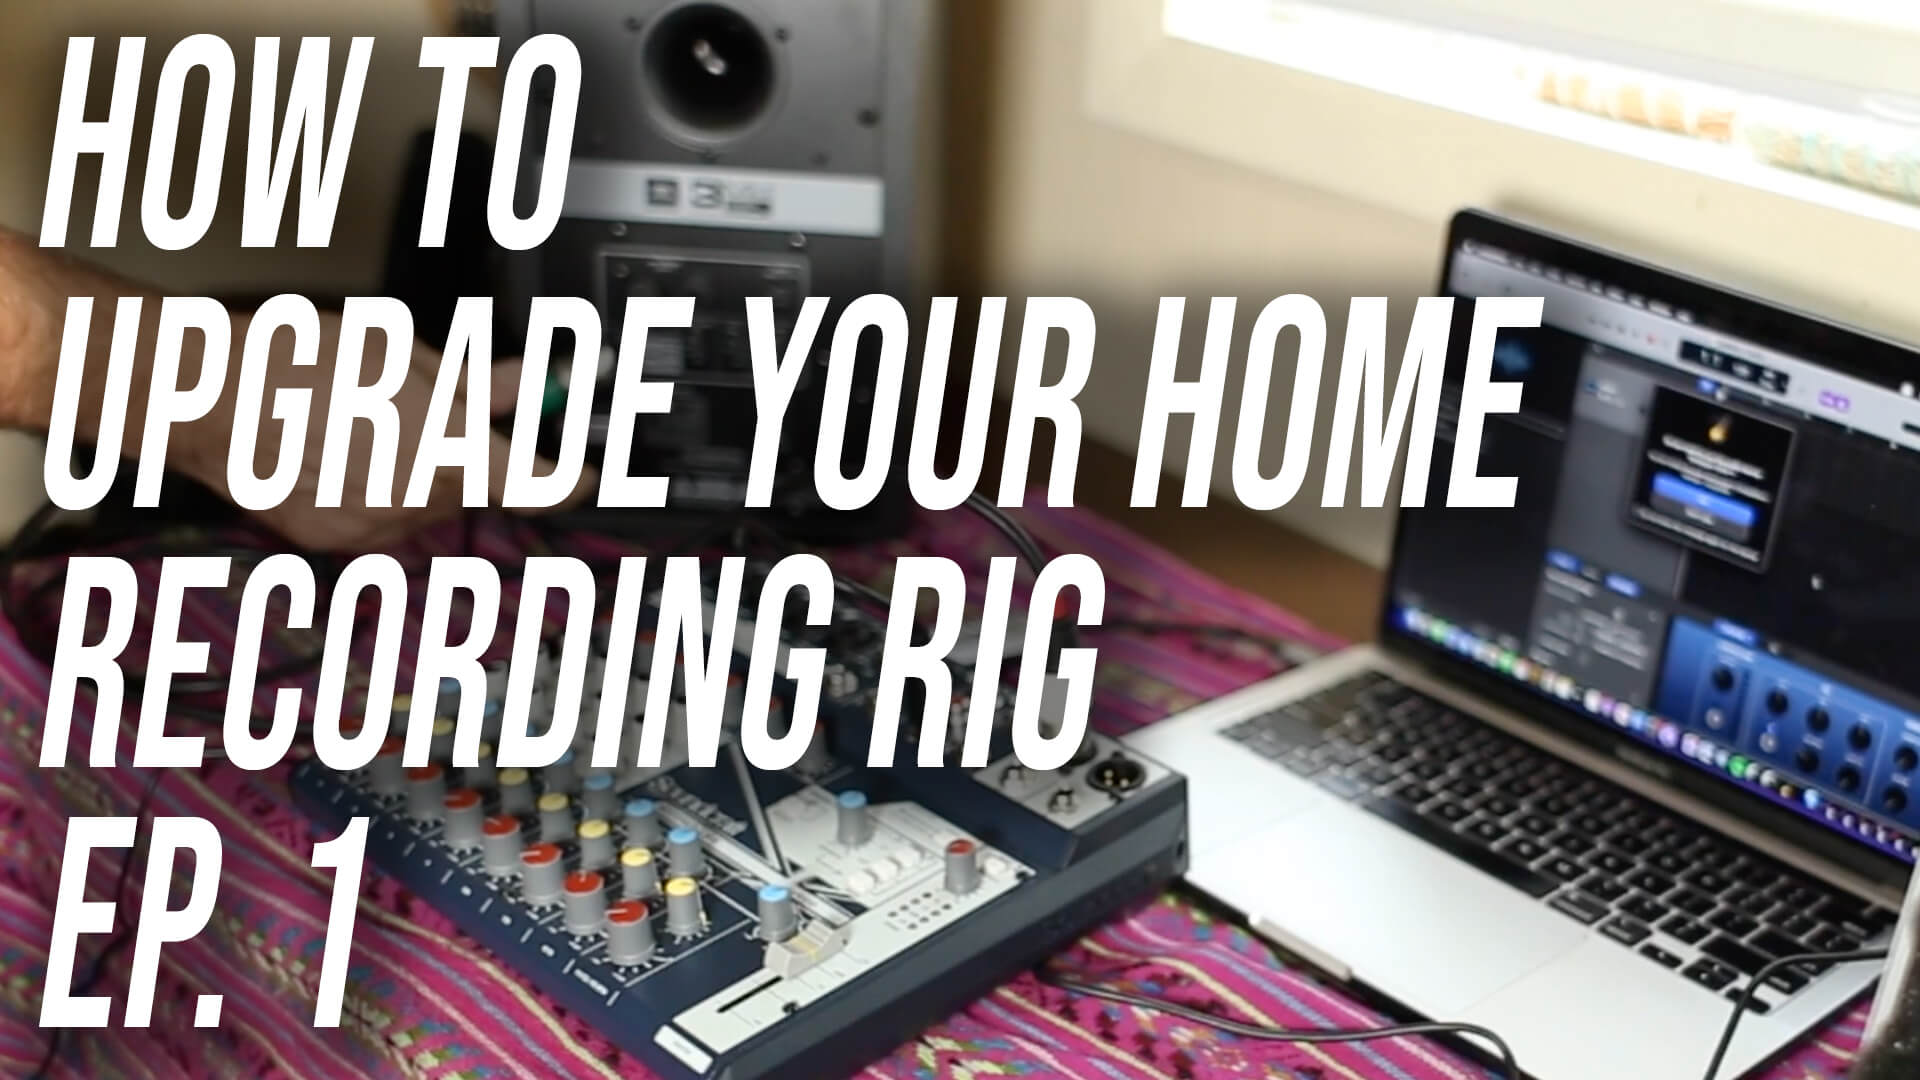 VIDEO: How to Upgrade Your Home Recording Rig with AKG, JBL + Soundcraft